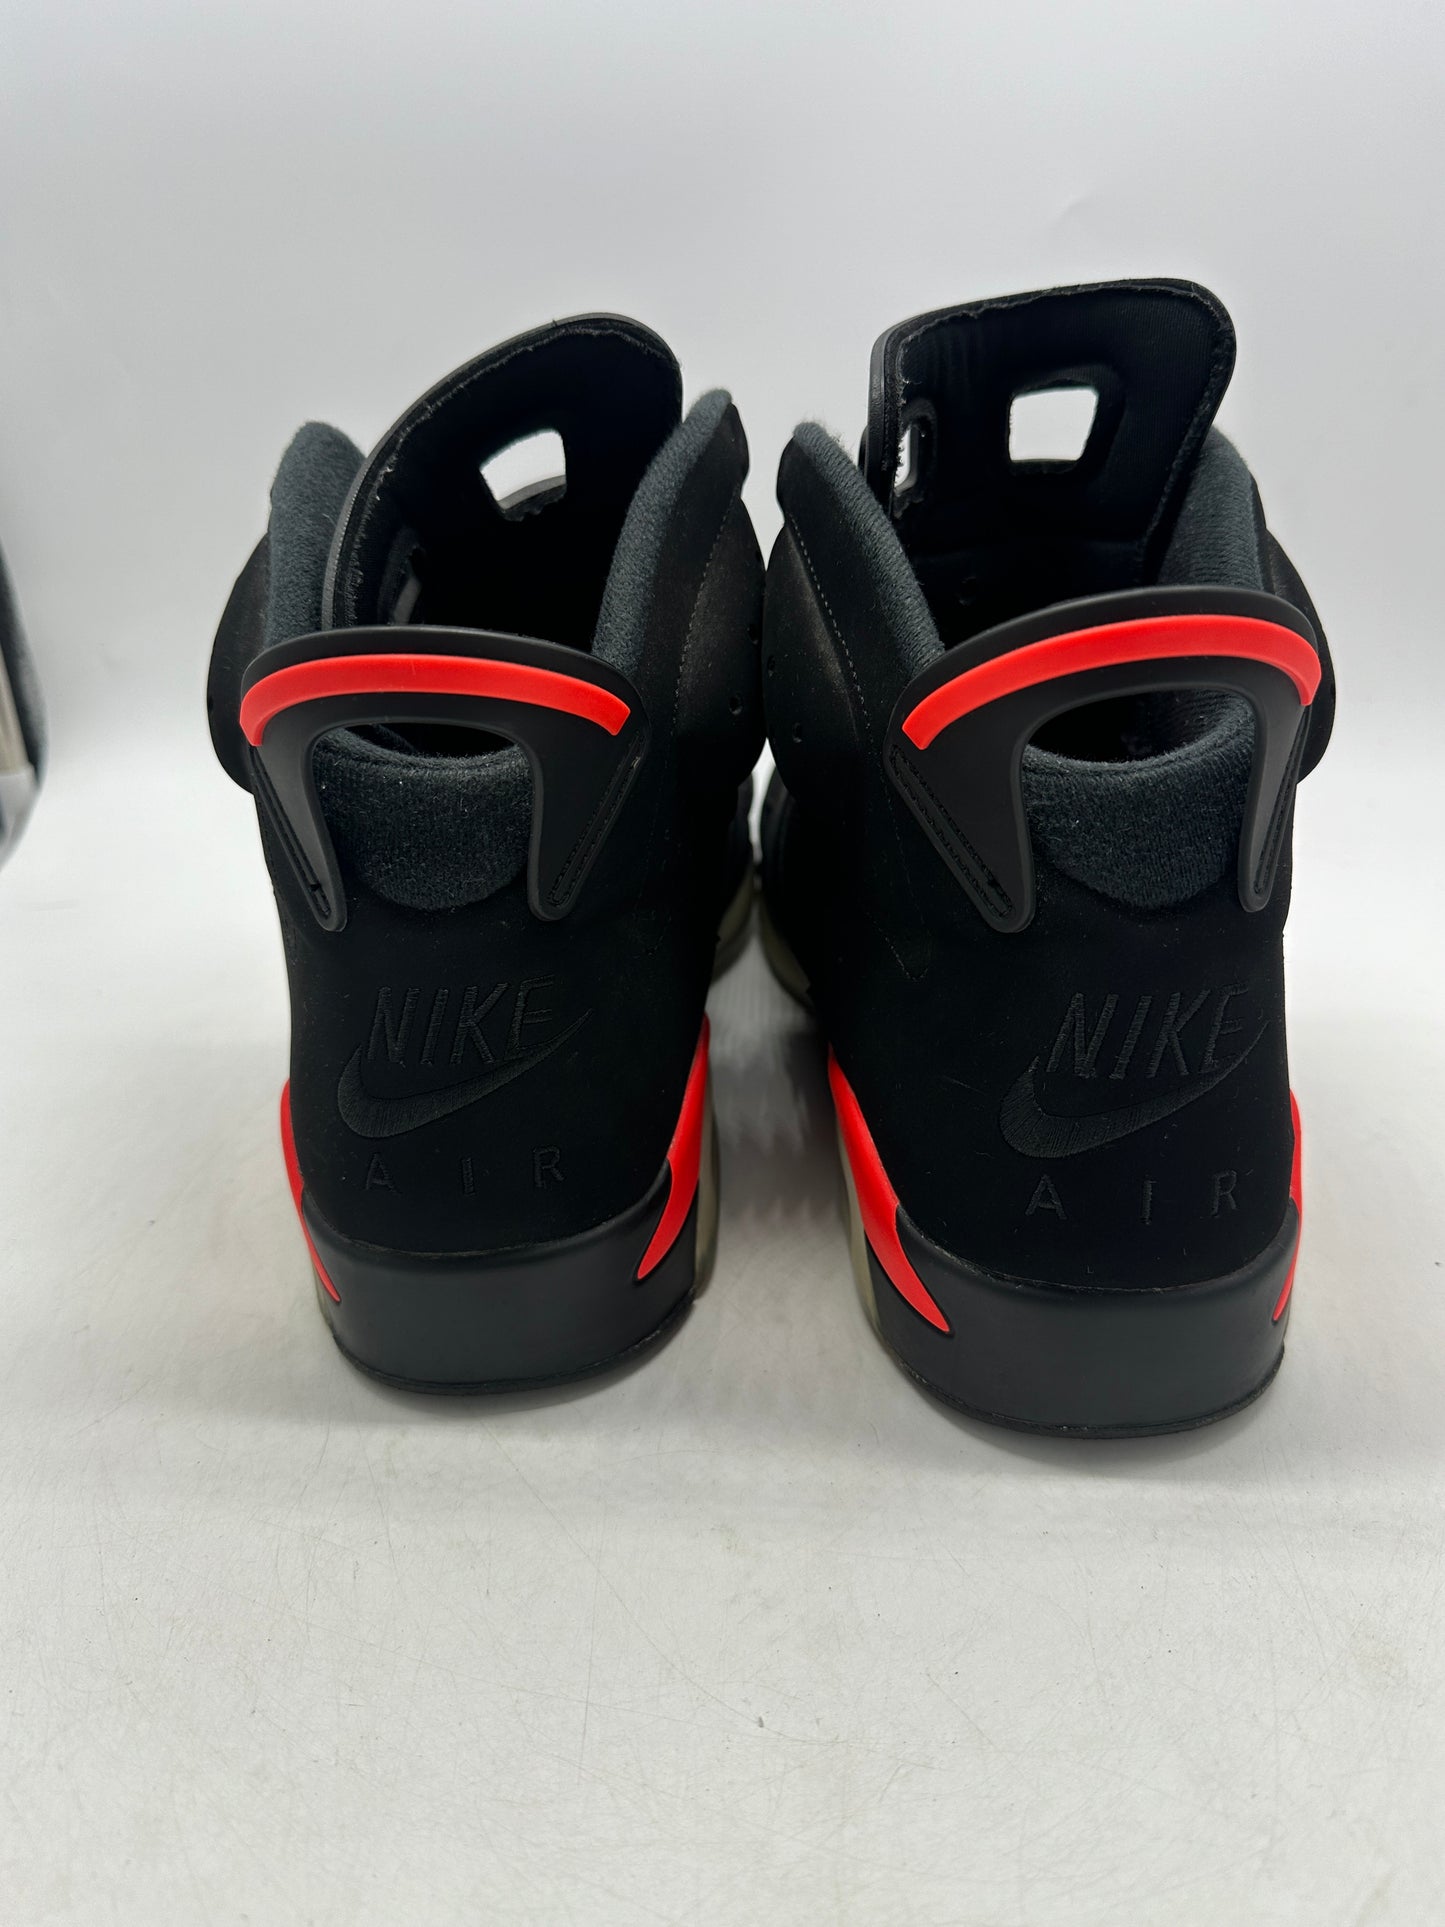 Load image into Gallery viewer, Preowned Jordan 6 Retro Black Infrared (2019) Sz 13M/14.5W
